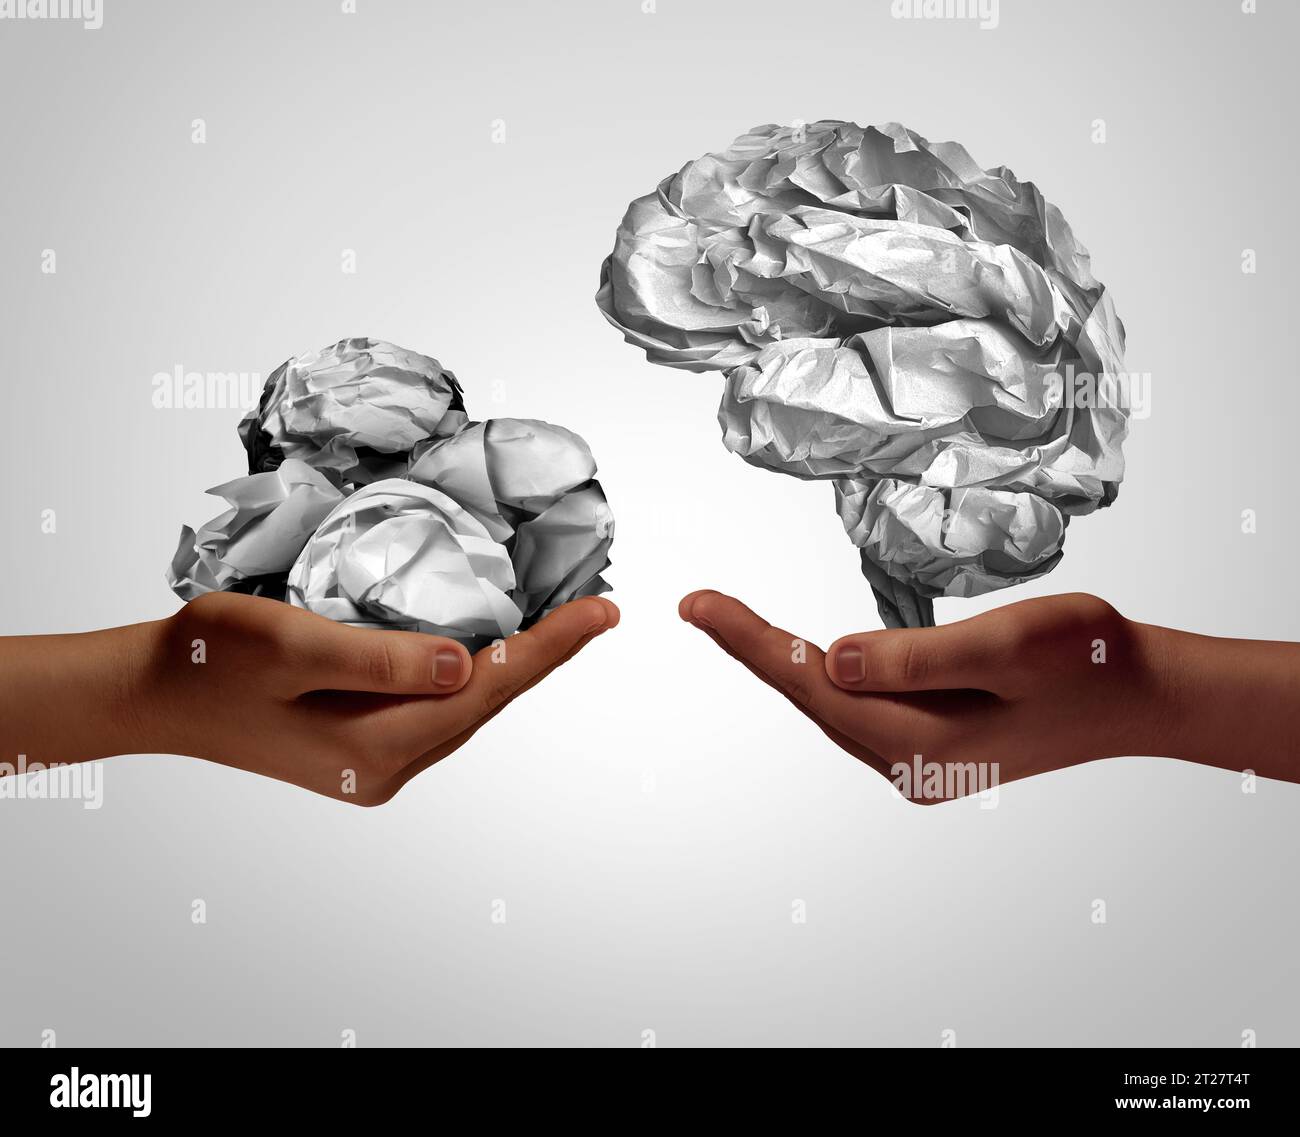 Chaos And Innovation as order and disorder concept as crumpled paper balls and a brain as a symbol for mental health therapy or management metaphor. Stock Photo